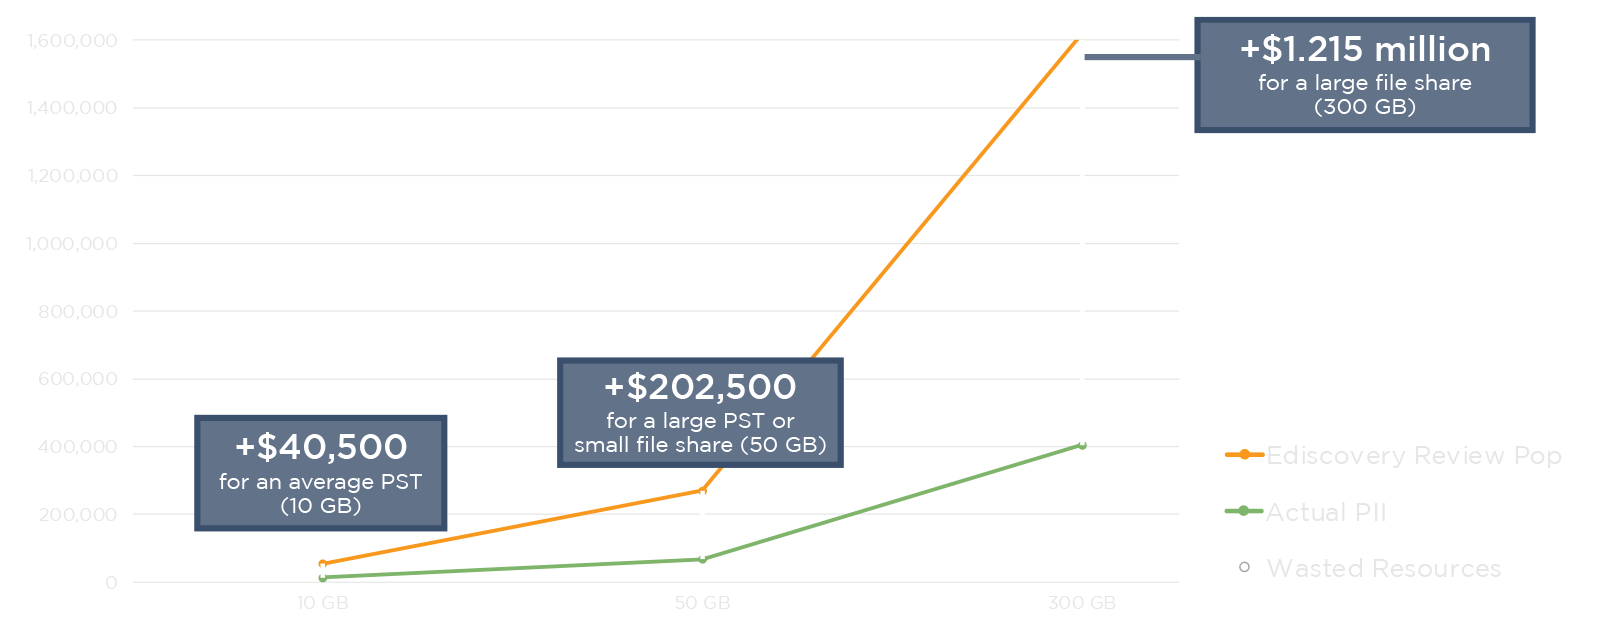 line graph showing the cost of PII review using ediscovery versus data breach response methods